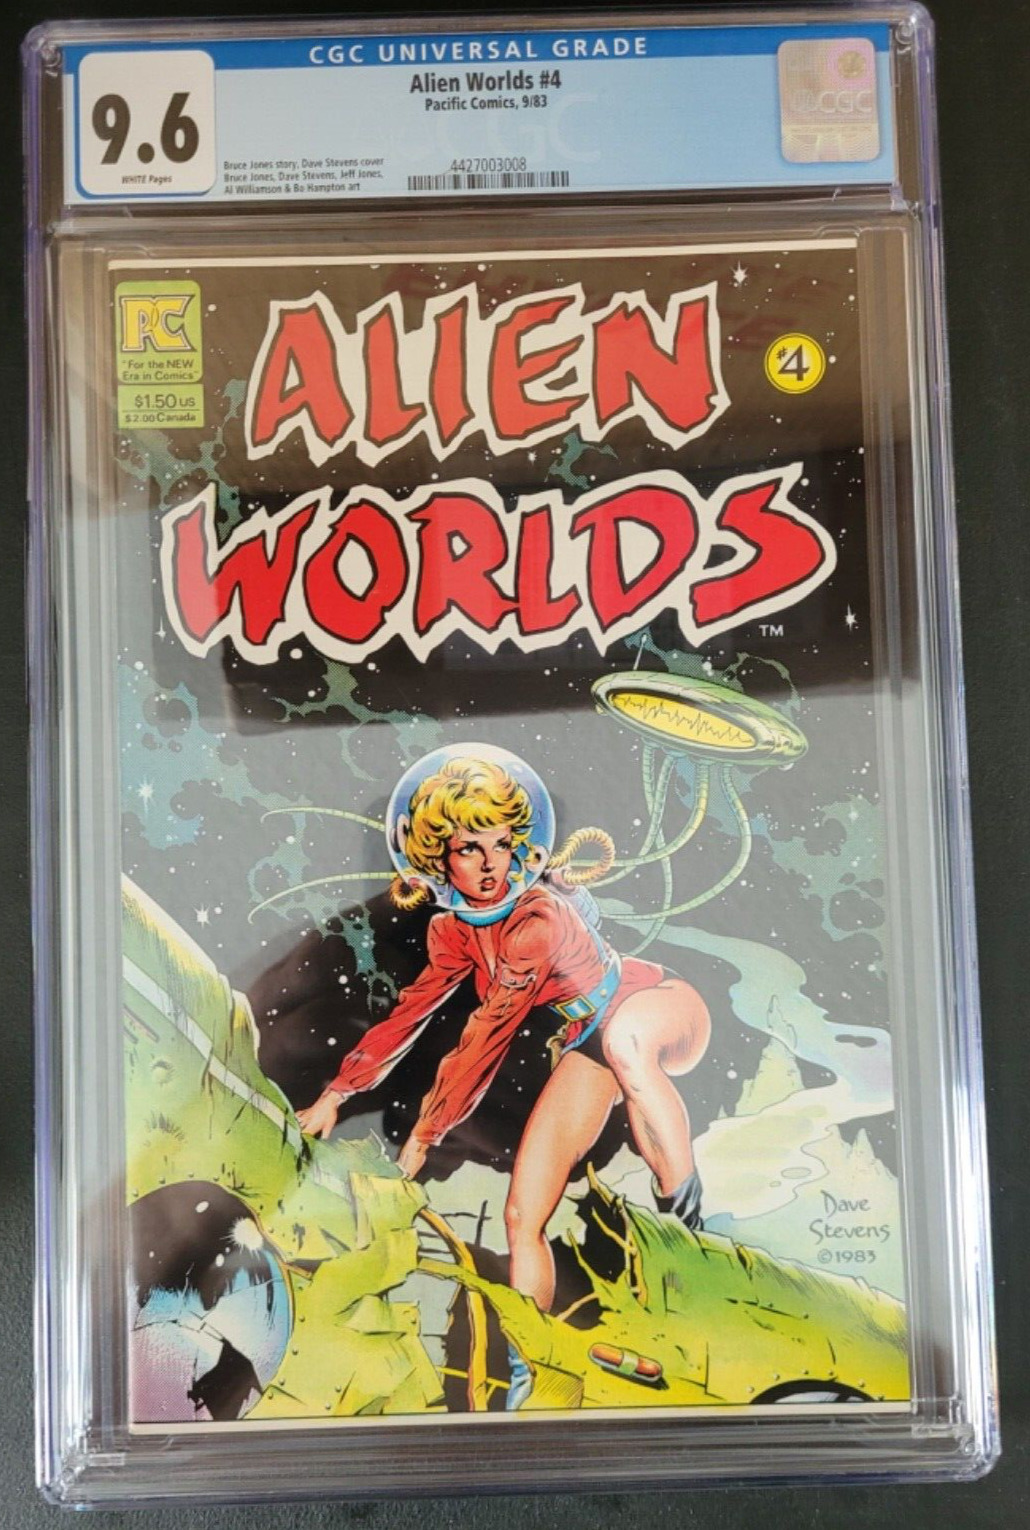 ALIEN WORLDS #4 CGC 9.6 GRADED 1983 PACIFIC INCREDIBLE DAVE STEVENS COVER ART